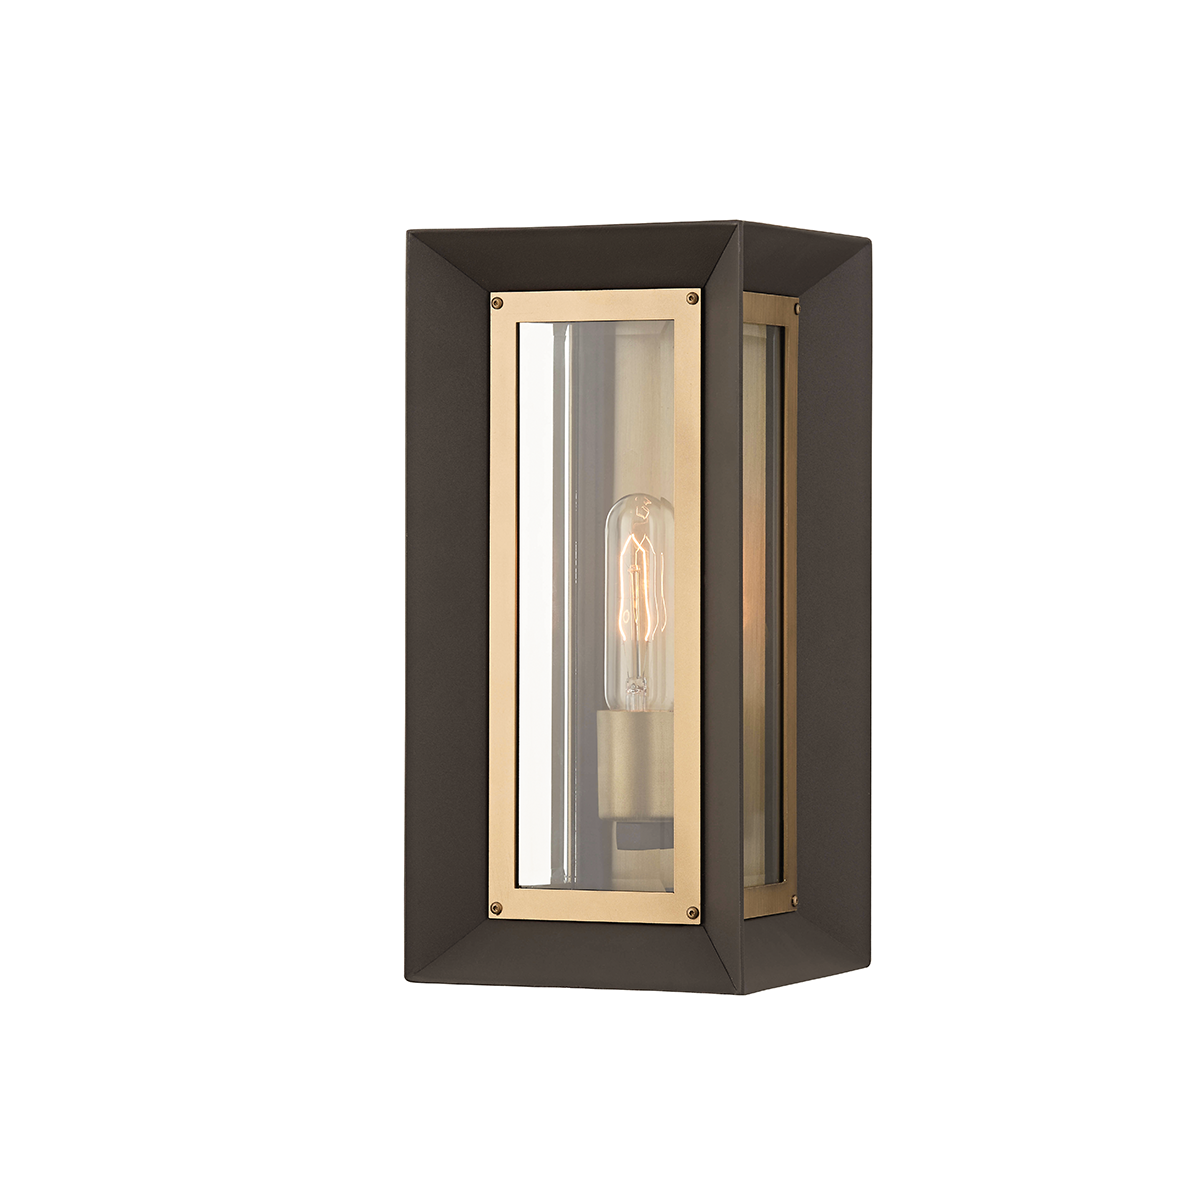 Troy Lighting 1 LIGHT SMALL EXTERIOR WALL SCONCE B4051